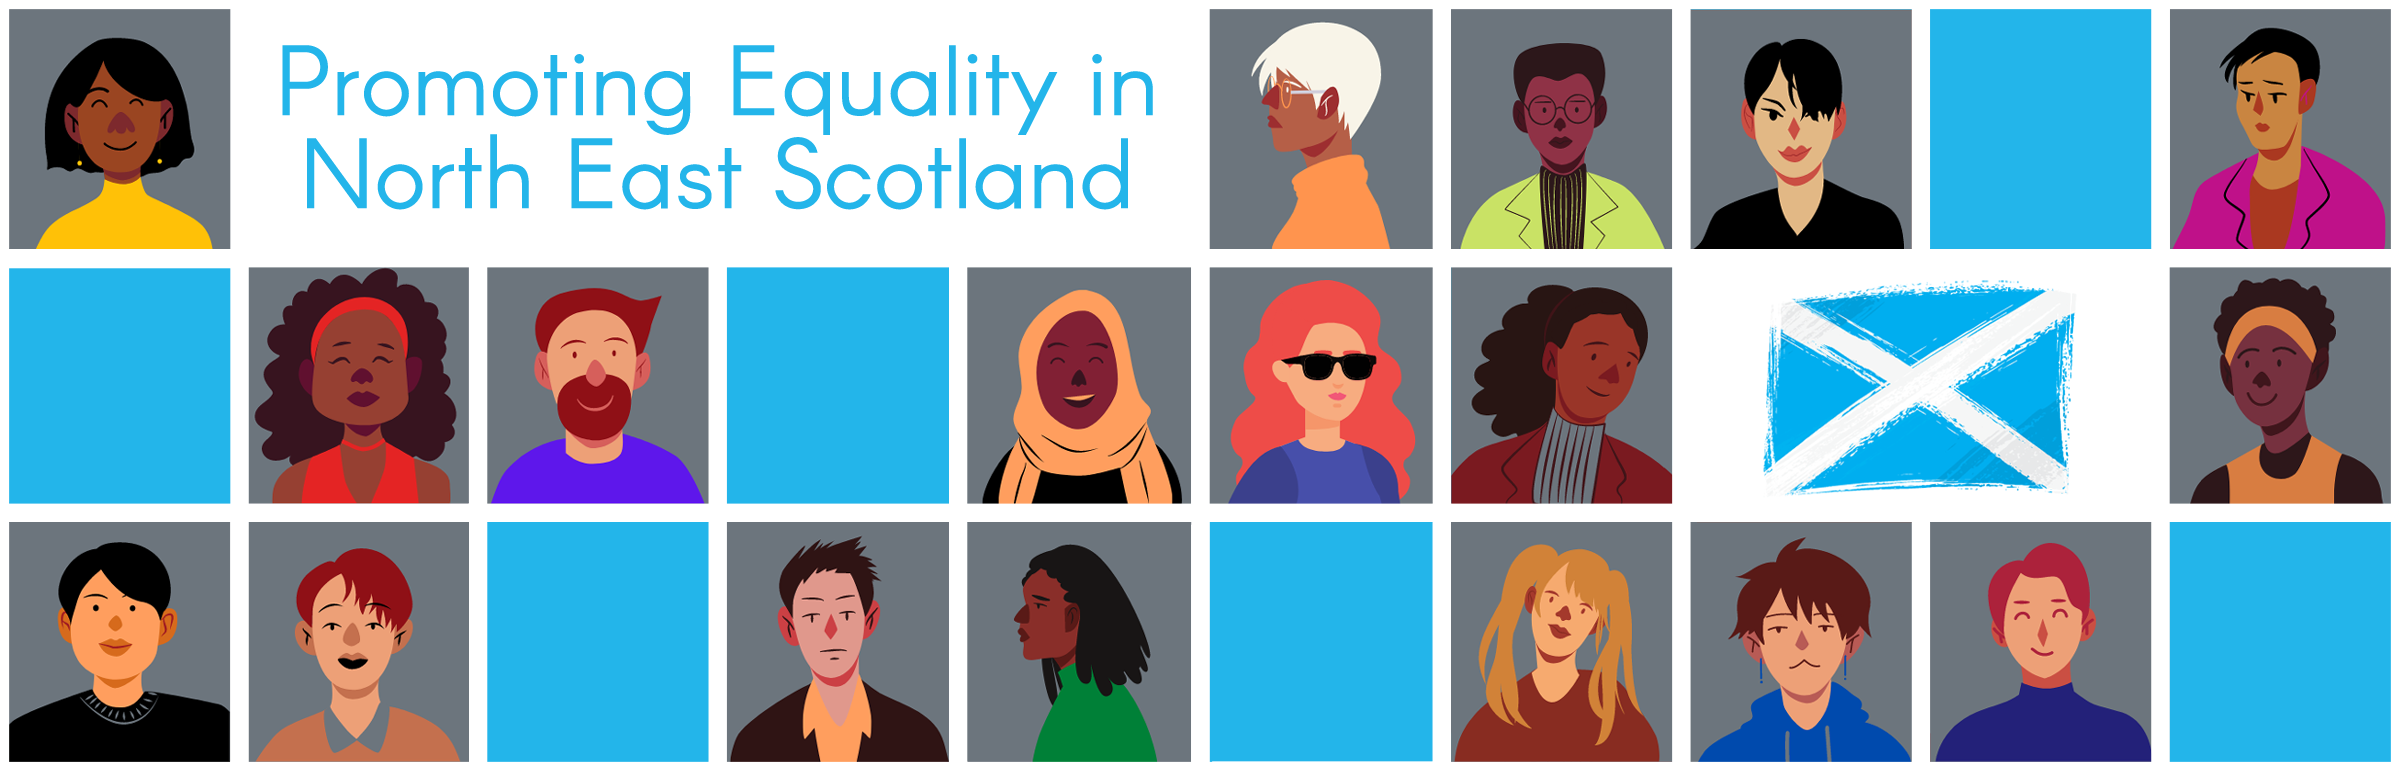 Promoting Equality in North East Scotland